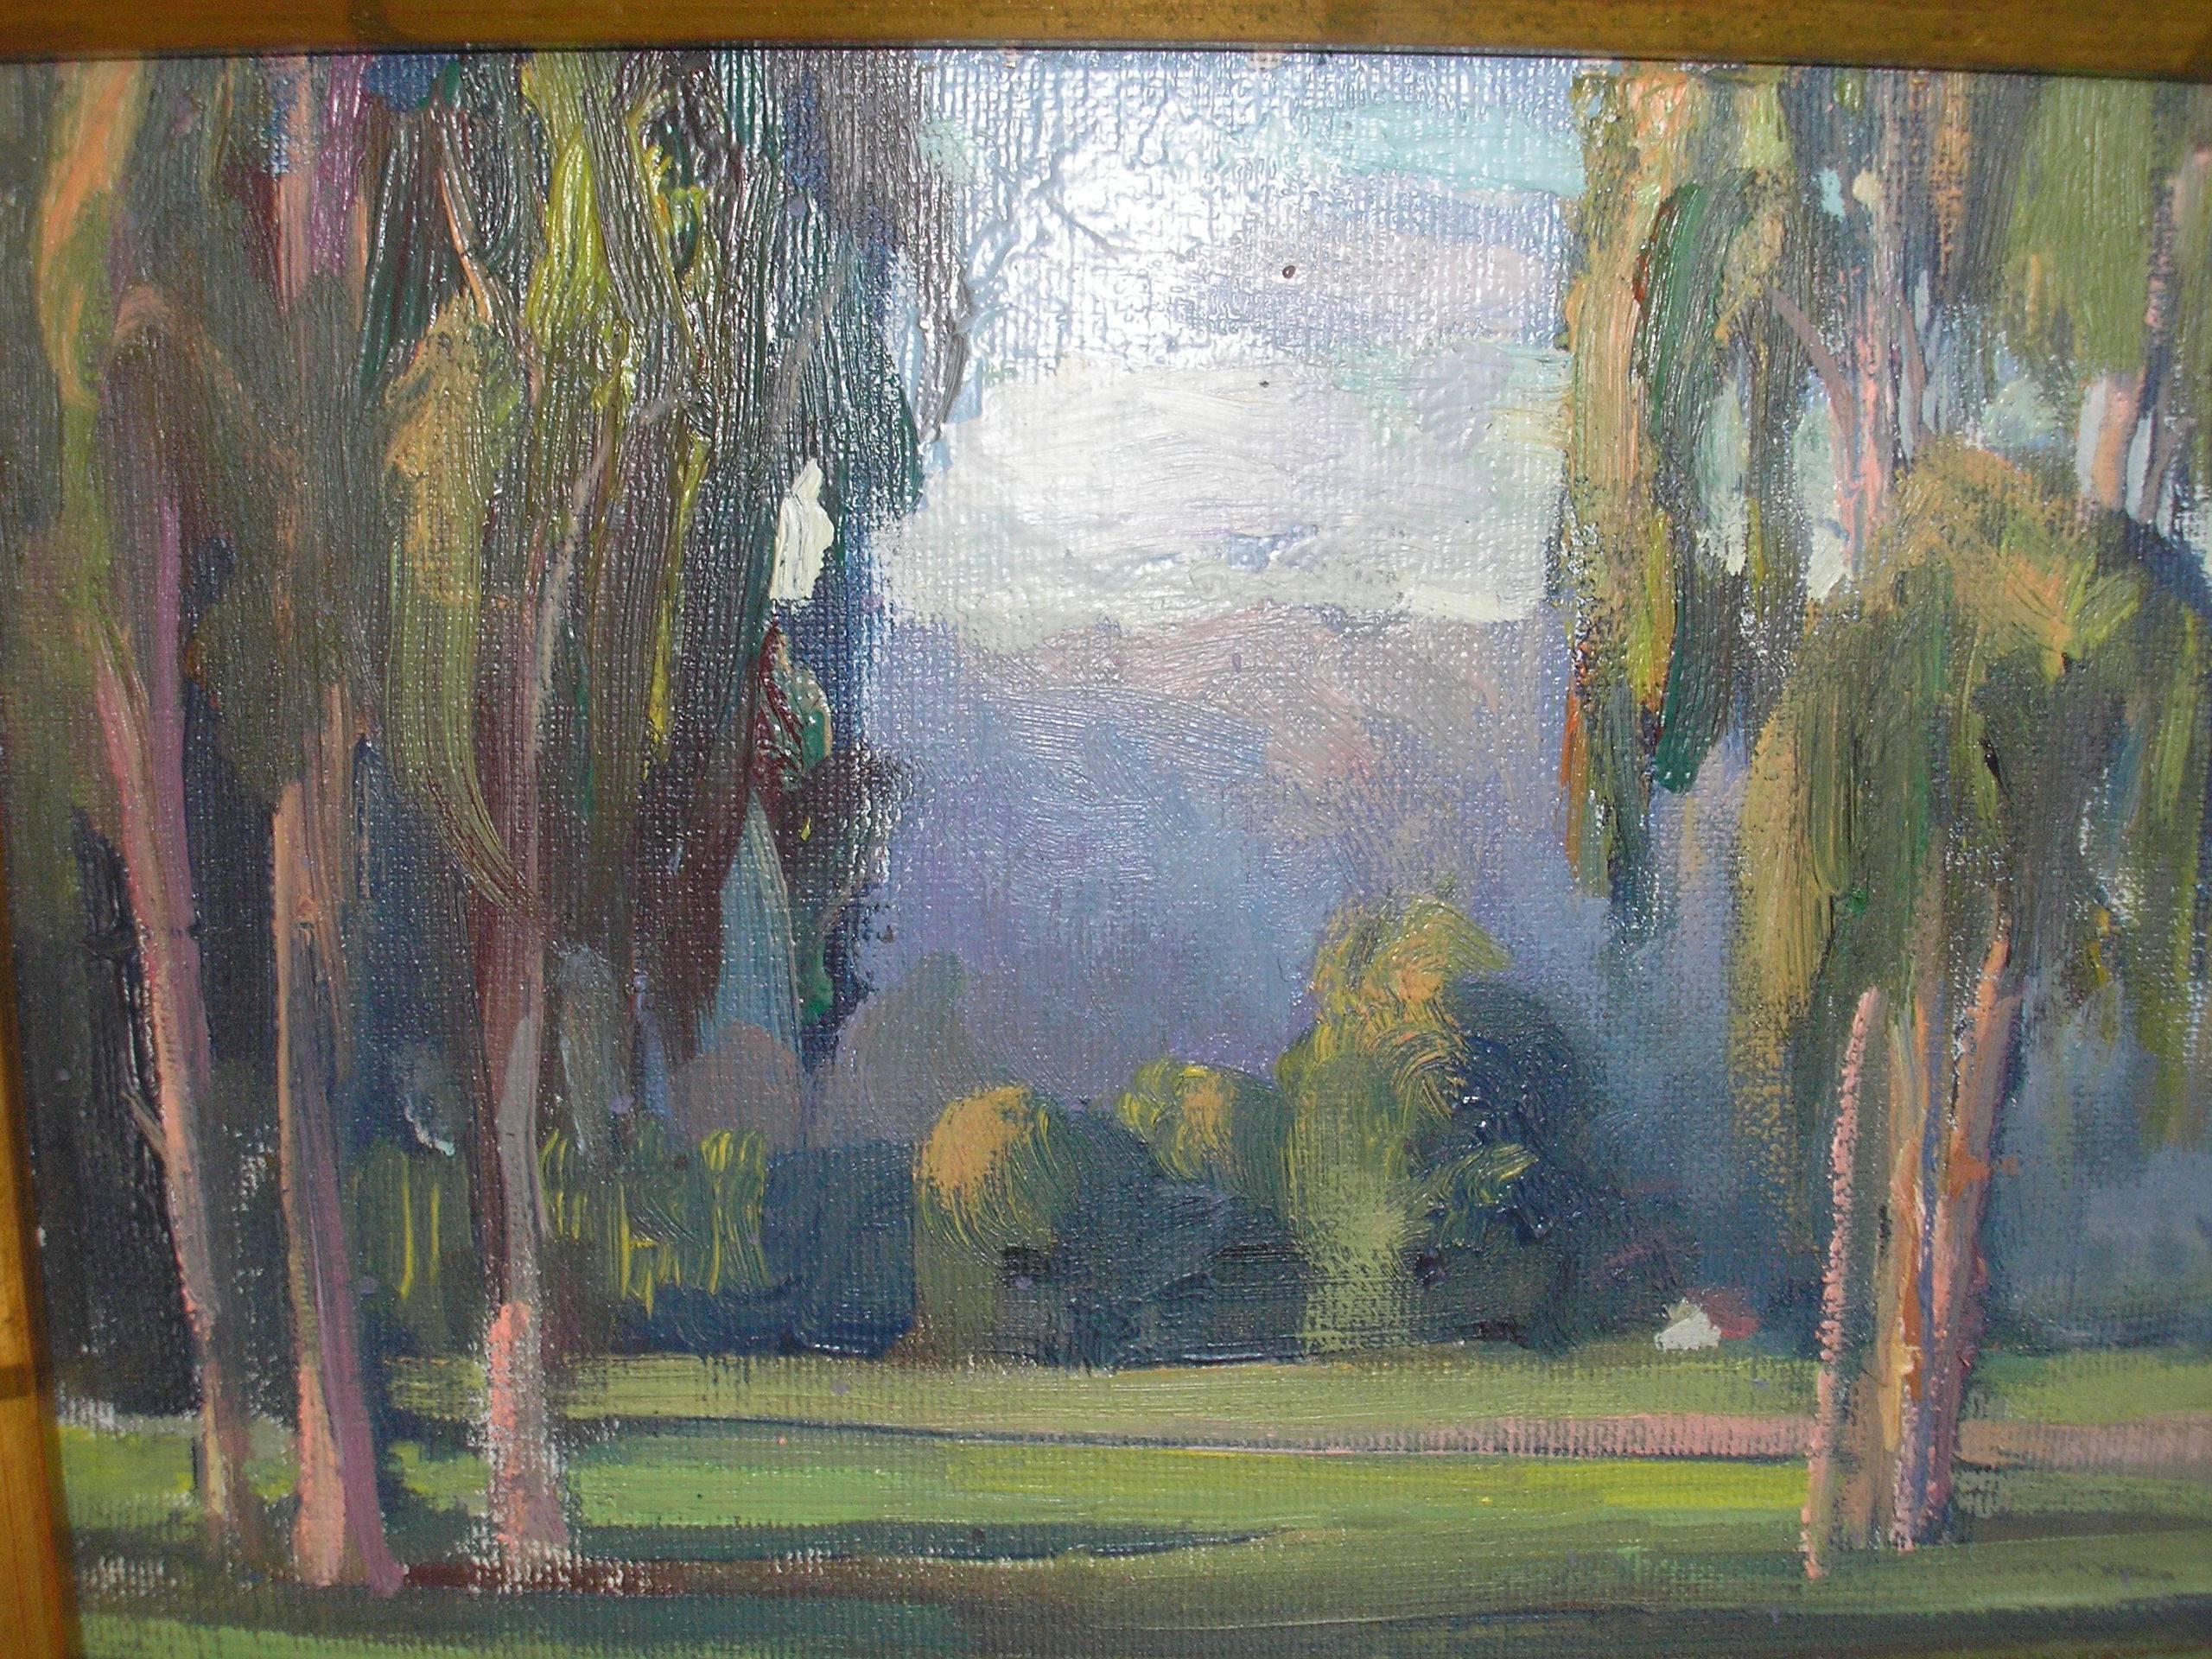 This painting is an original oil of a California Landscape by William Dorsey. Impressionistic in style, circa 1950. It measures 13.75 x 10.75 inches. Frame is rustic and in good condition.